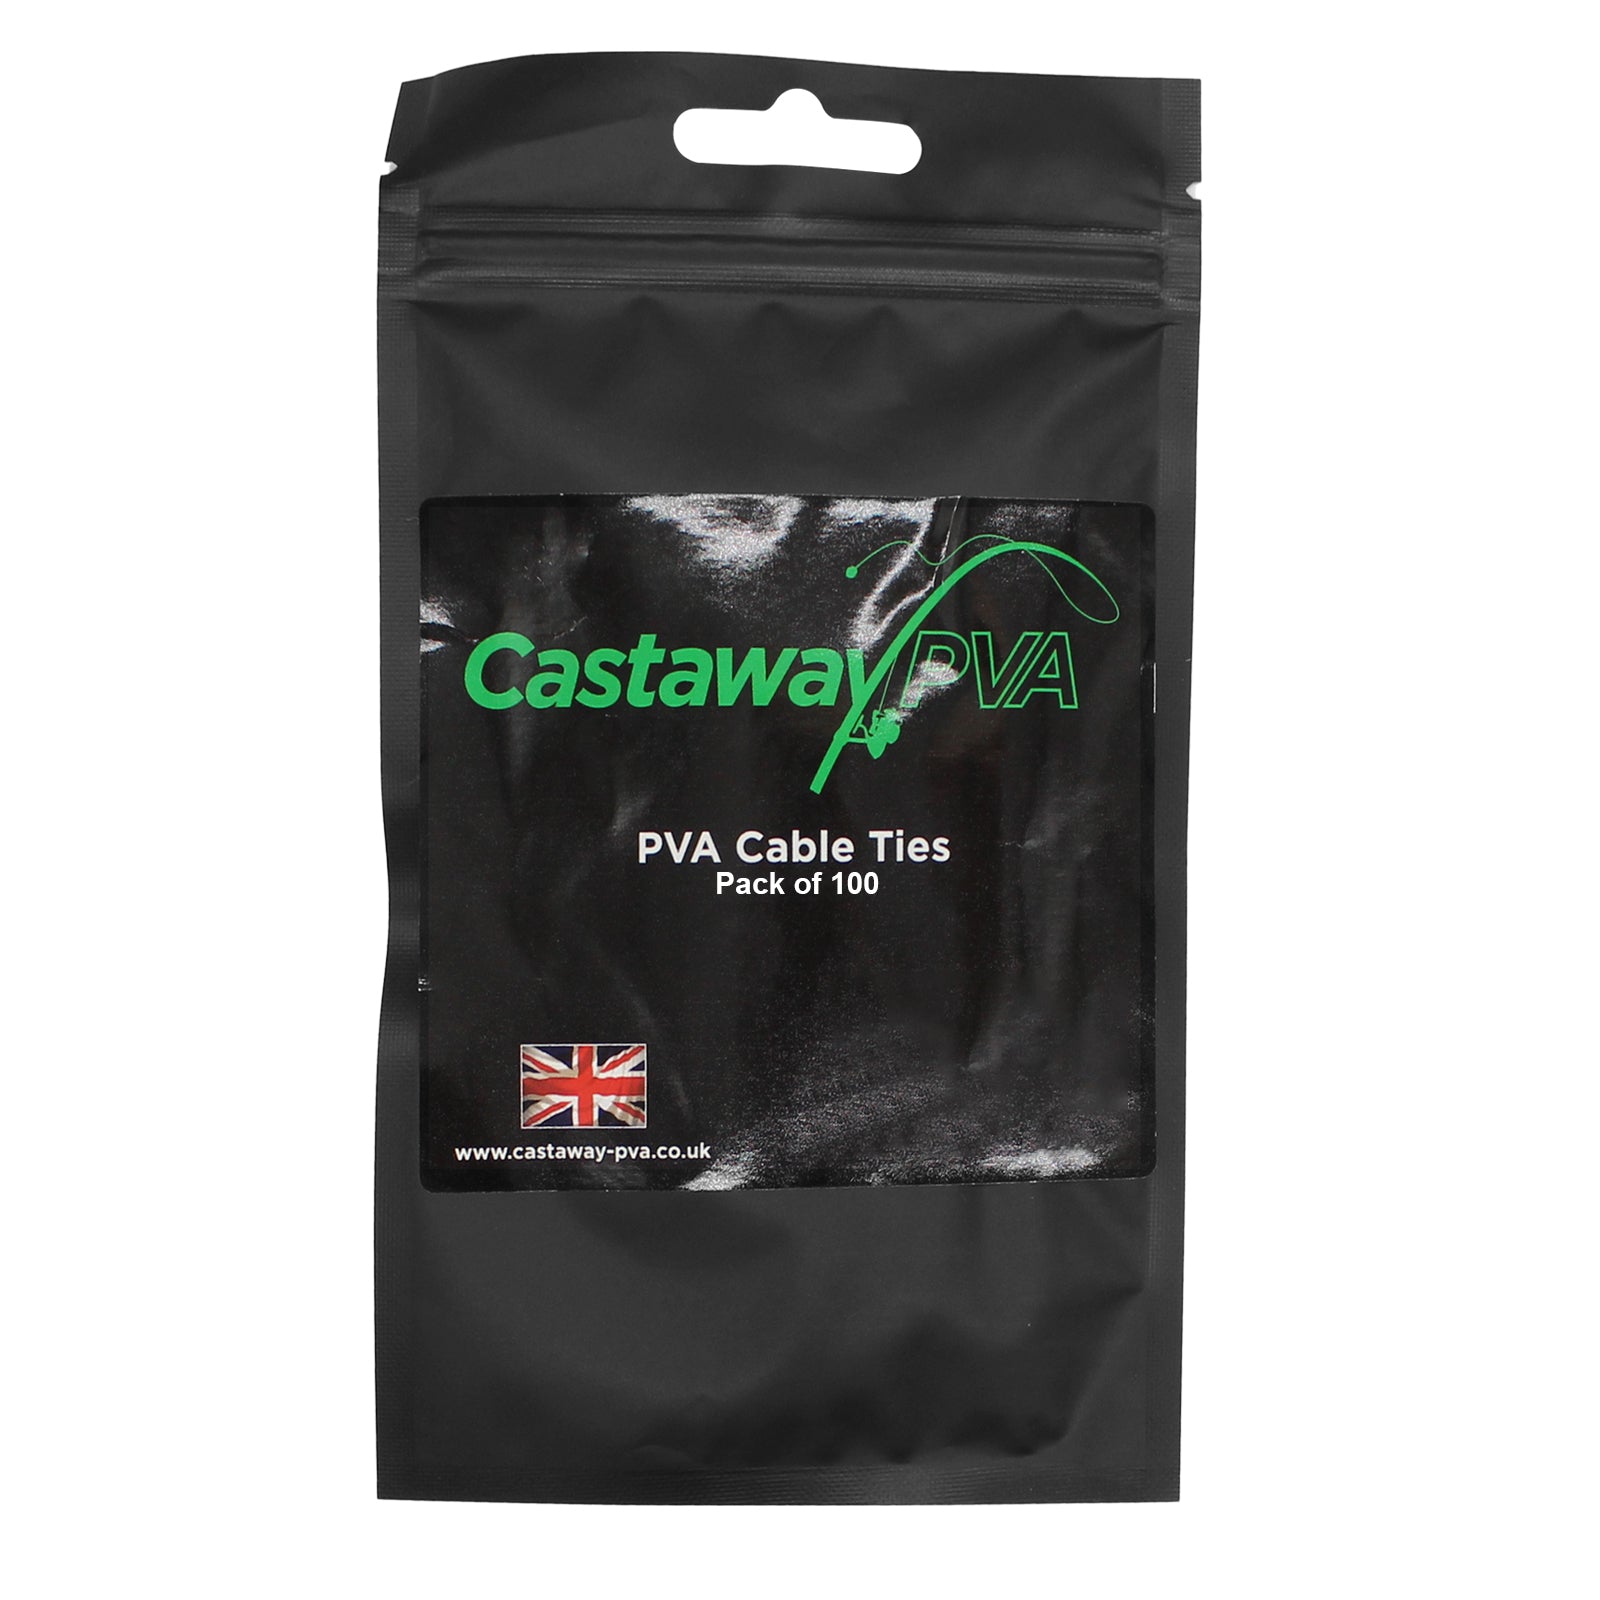 Castaway PVA Cable Ties Pack of 100